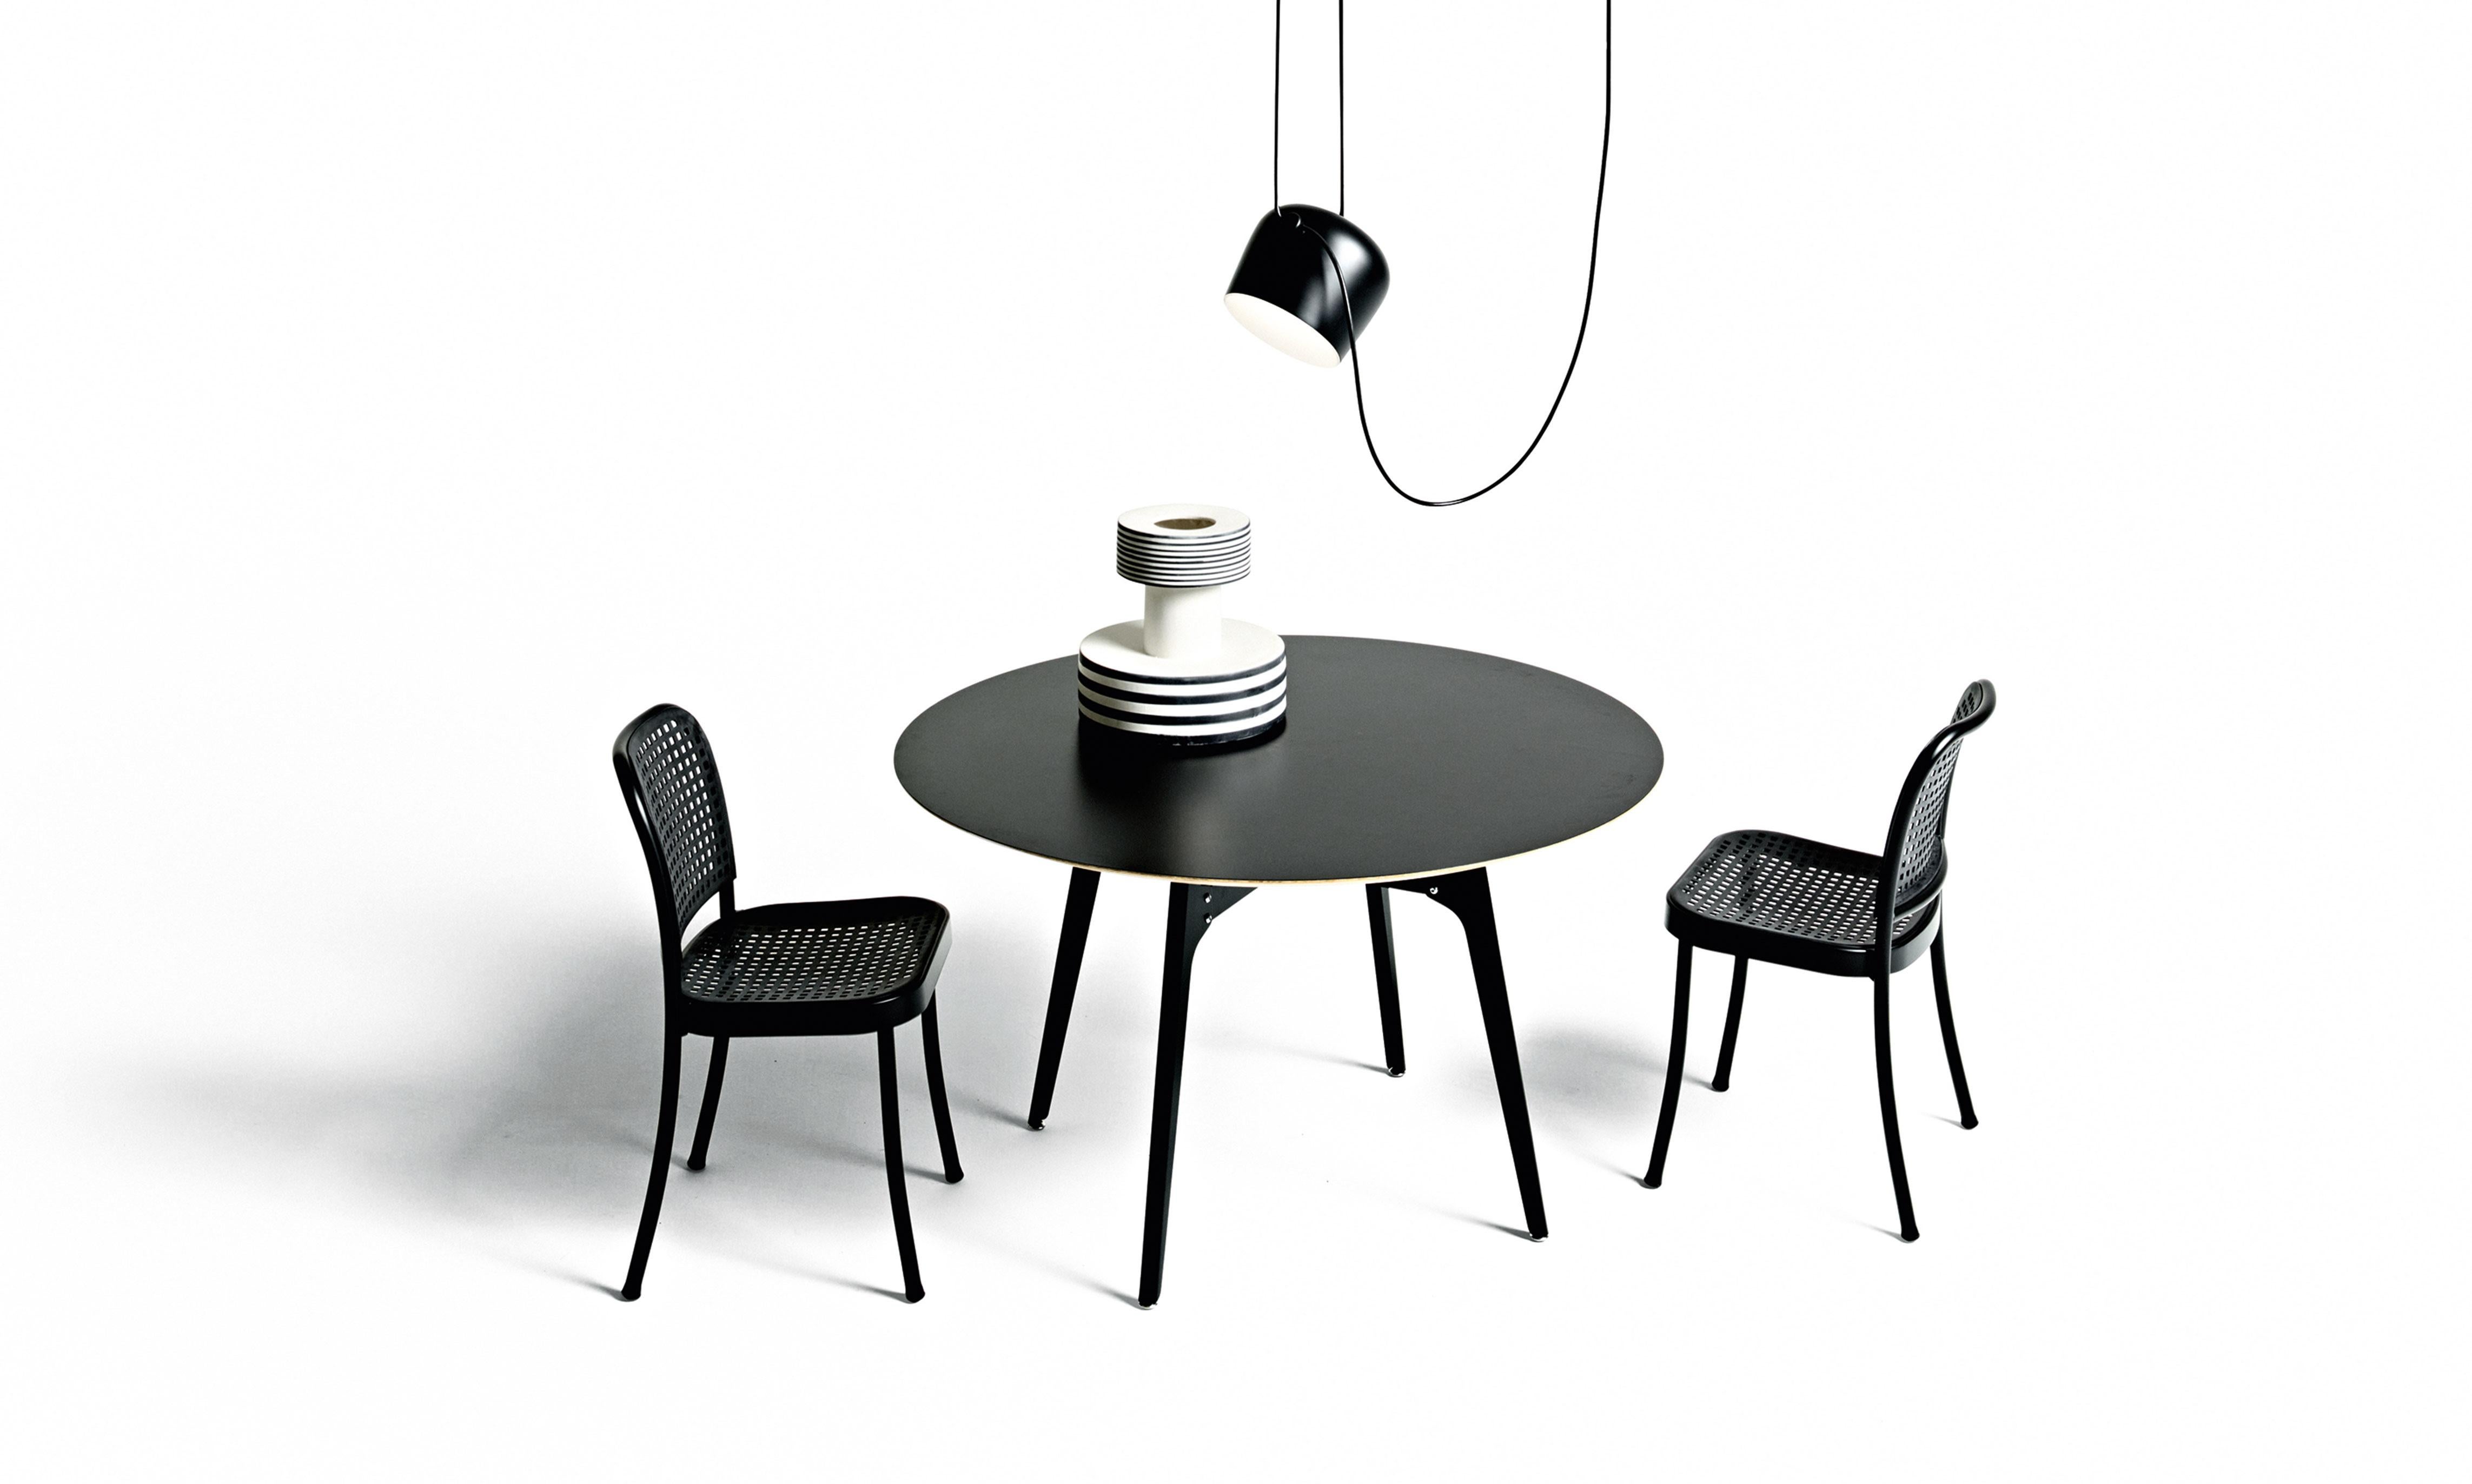 Inspired by the proportions of the classic Thonet chair, Vico Magistretti designed a polypropylene and aluminum chair that’s comfortable, light, and sturdy. Suitable for around the dining table or in the study, it is so versatile and adaptable that